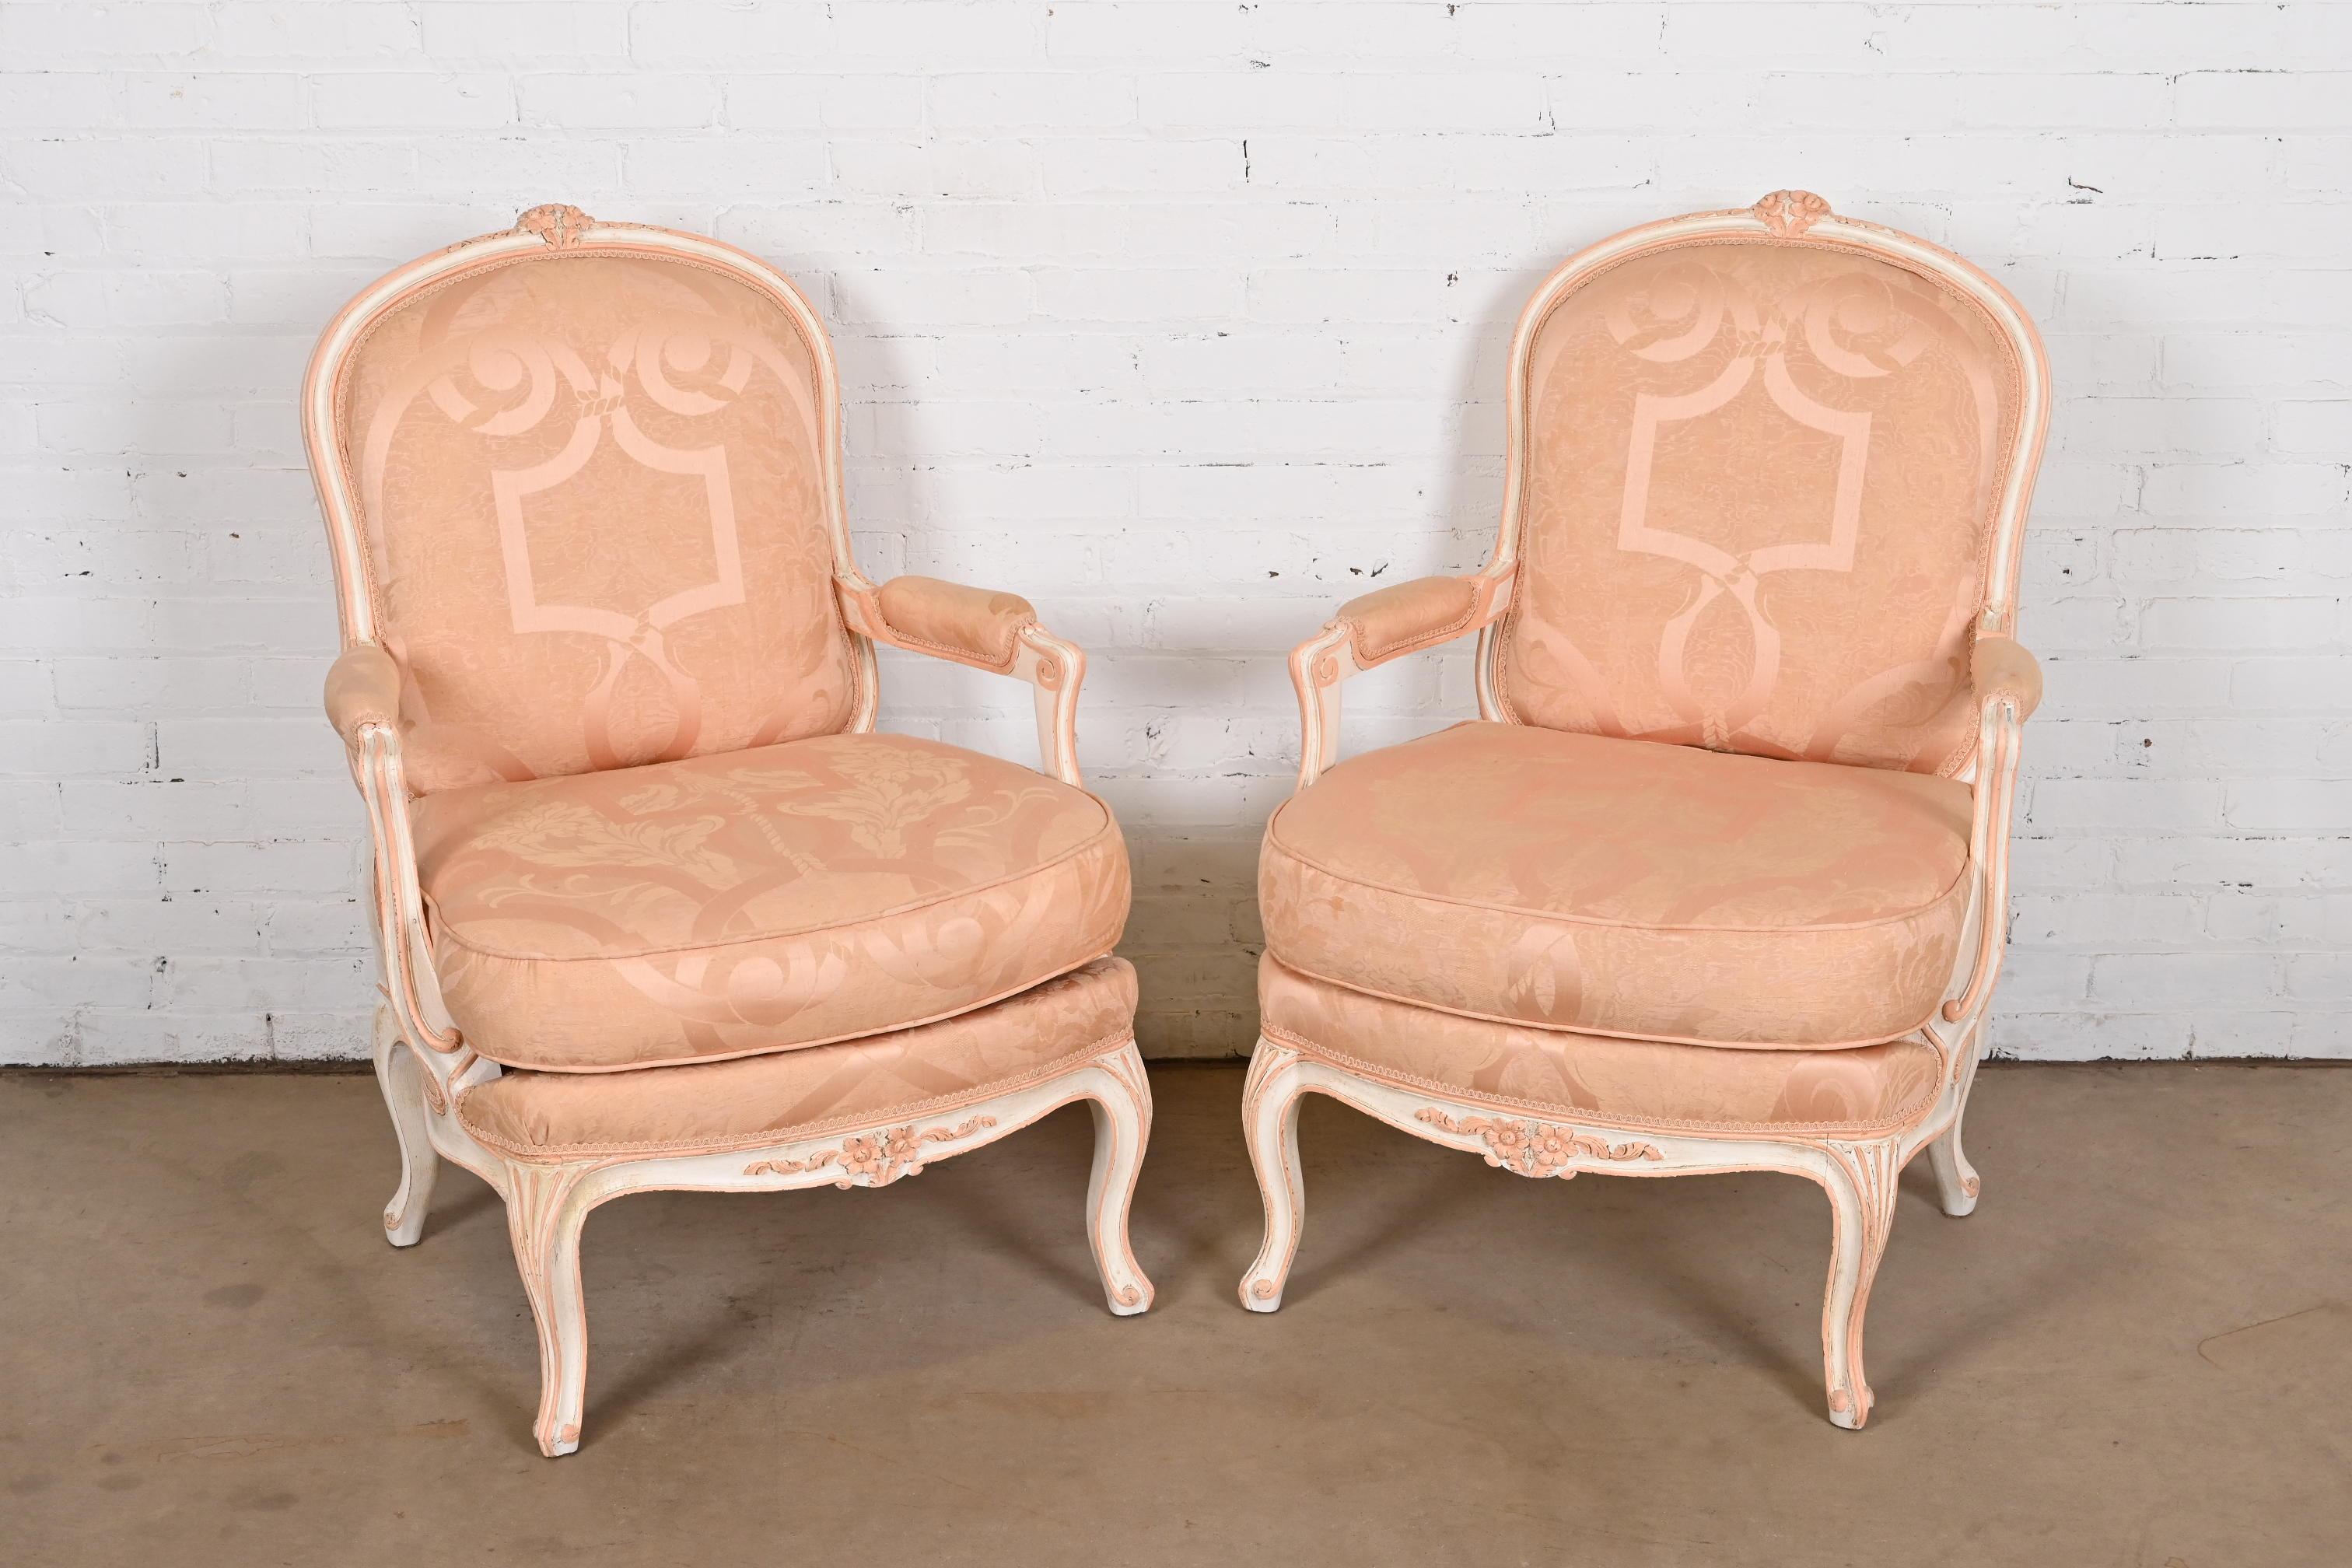 A gorgeous pair of French Provincial Louis XV style upholstered lounge chairs or Bergere chairs

In the manner of Baker Furniture

USA, Circa 1940s

Carved walnut frames, painted in cream and light pink with pink damask upholstered seats and